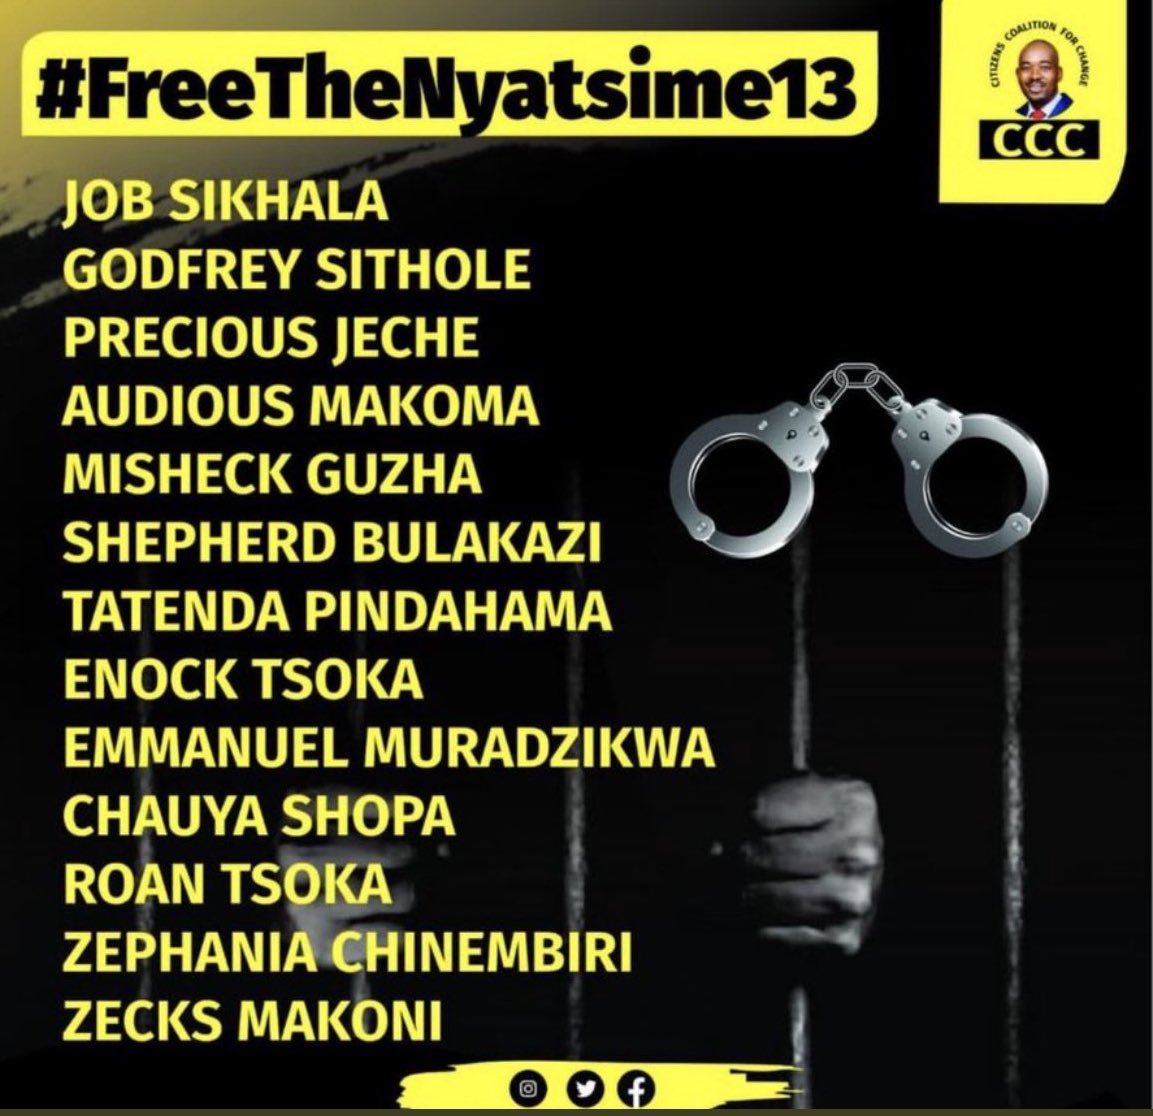 @MoJLPA @nickmangwana @psczimbabwe @FinanceZw @InfoMinZW @MinistryofTID @MoFA_ZW These 13 here are victims of injustice. They have been wondering for weeks now whether there is something called justice in Zimbabwe. Who will hear their voices??